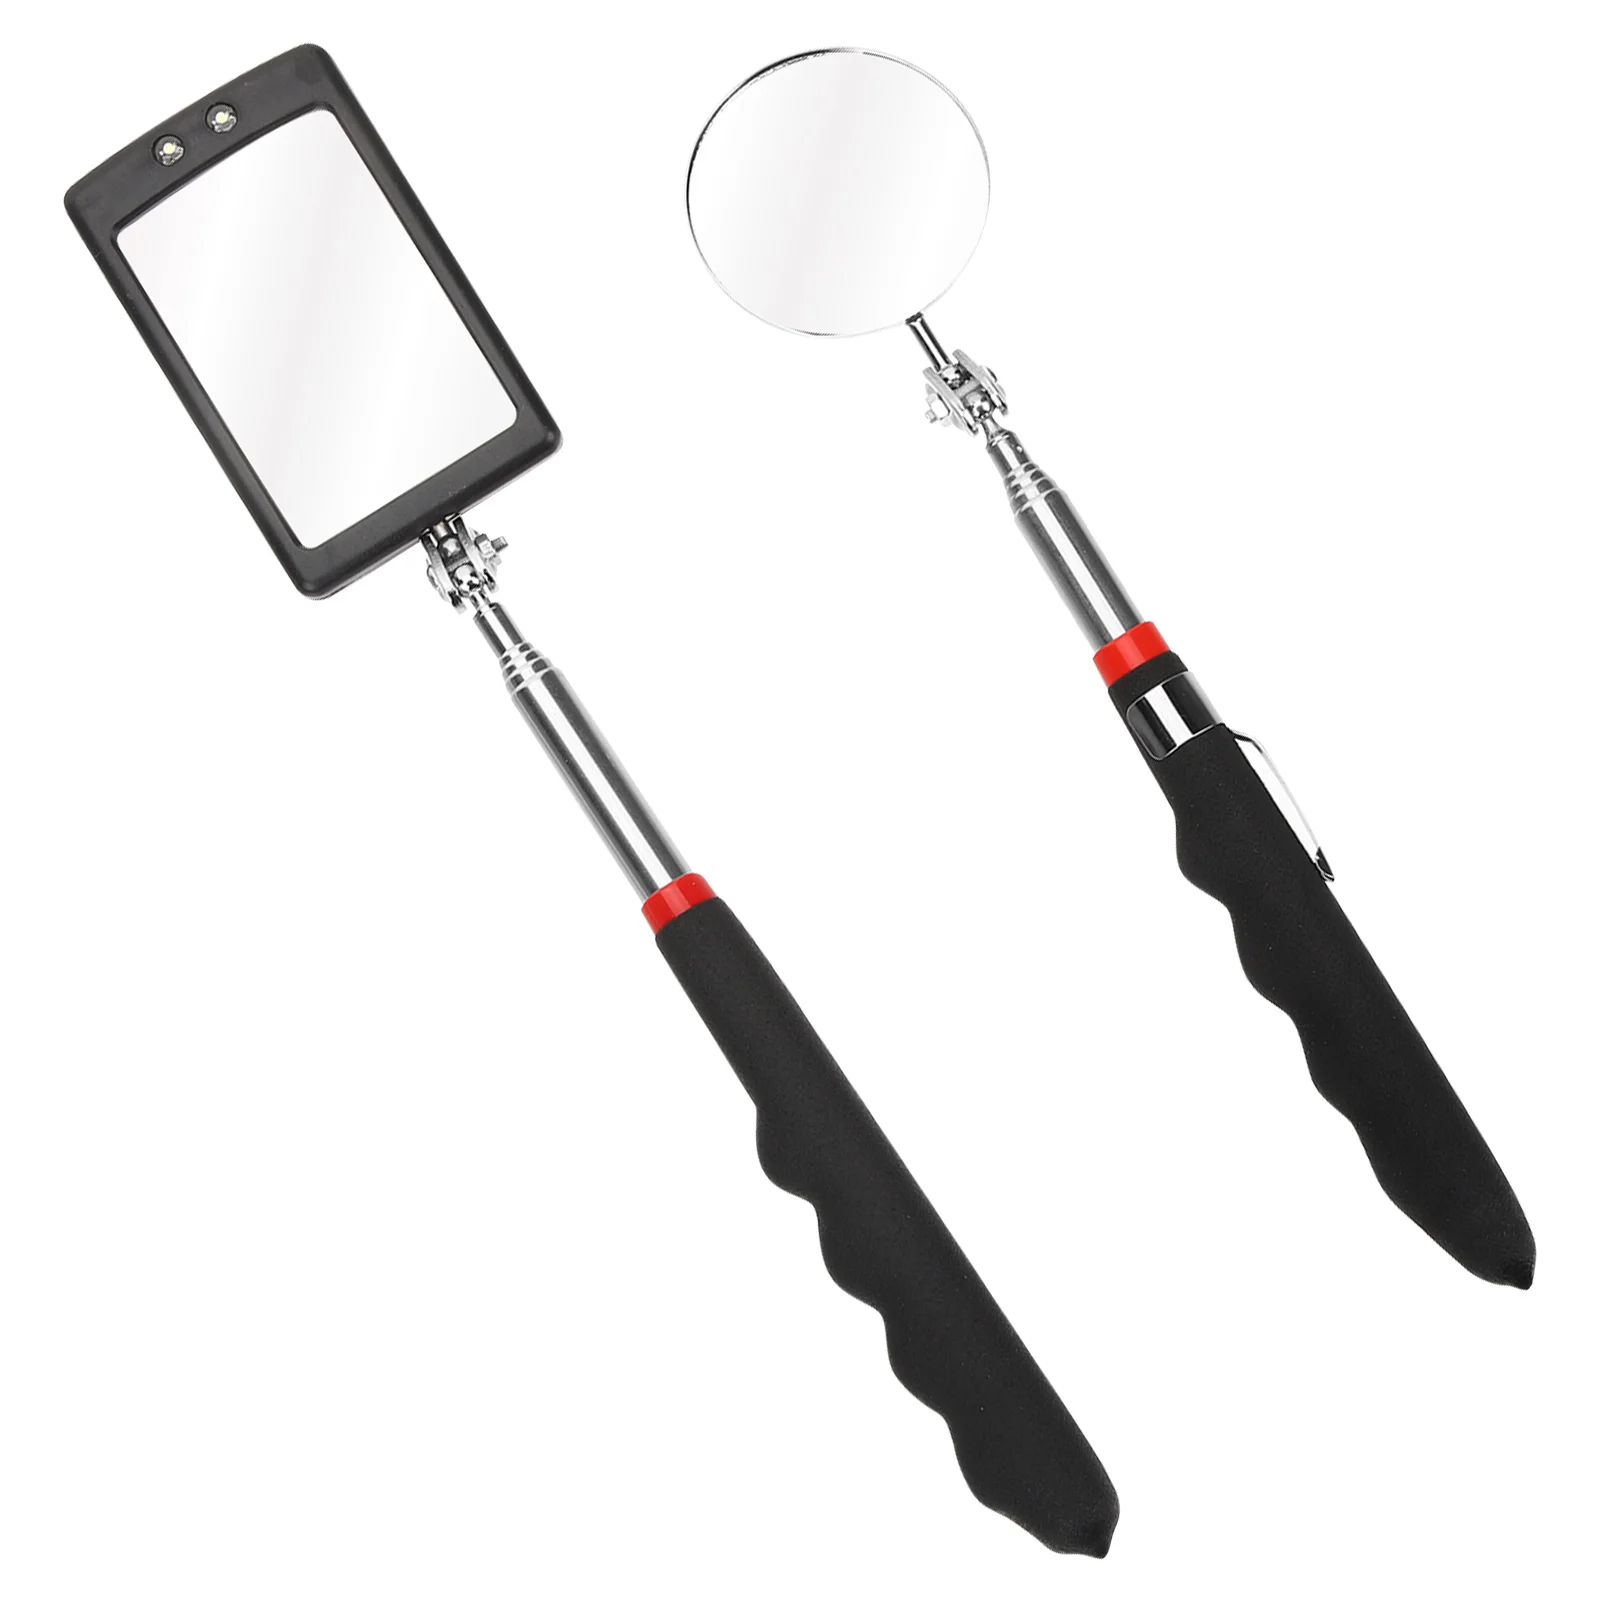 

Mirror Inspection Telescoping Telescopic Pick Up Stick Flexible Extending Rod Adjustable Tool Mechanic Led Lighted Claws Grabber